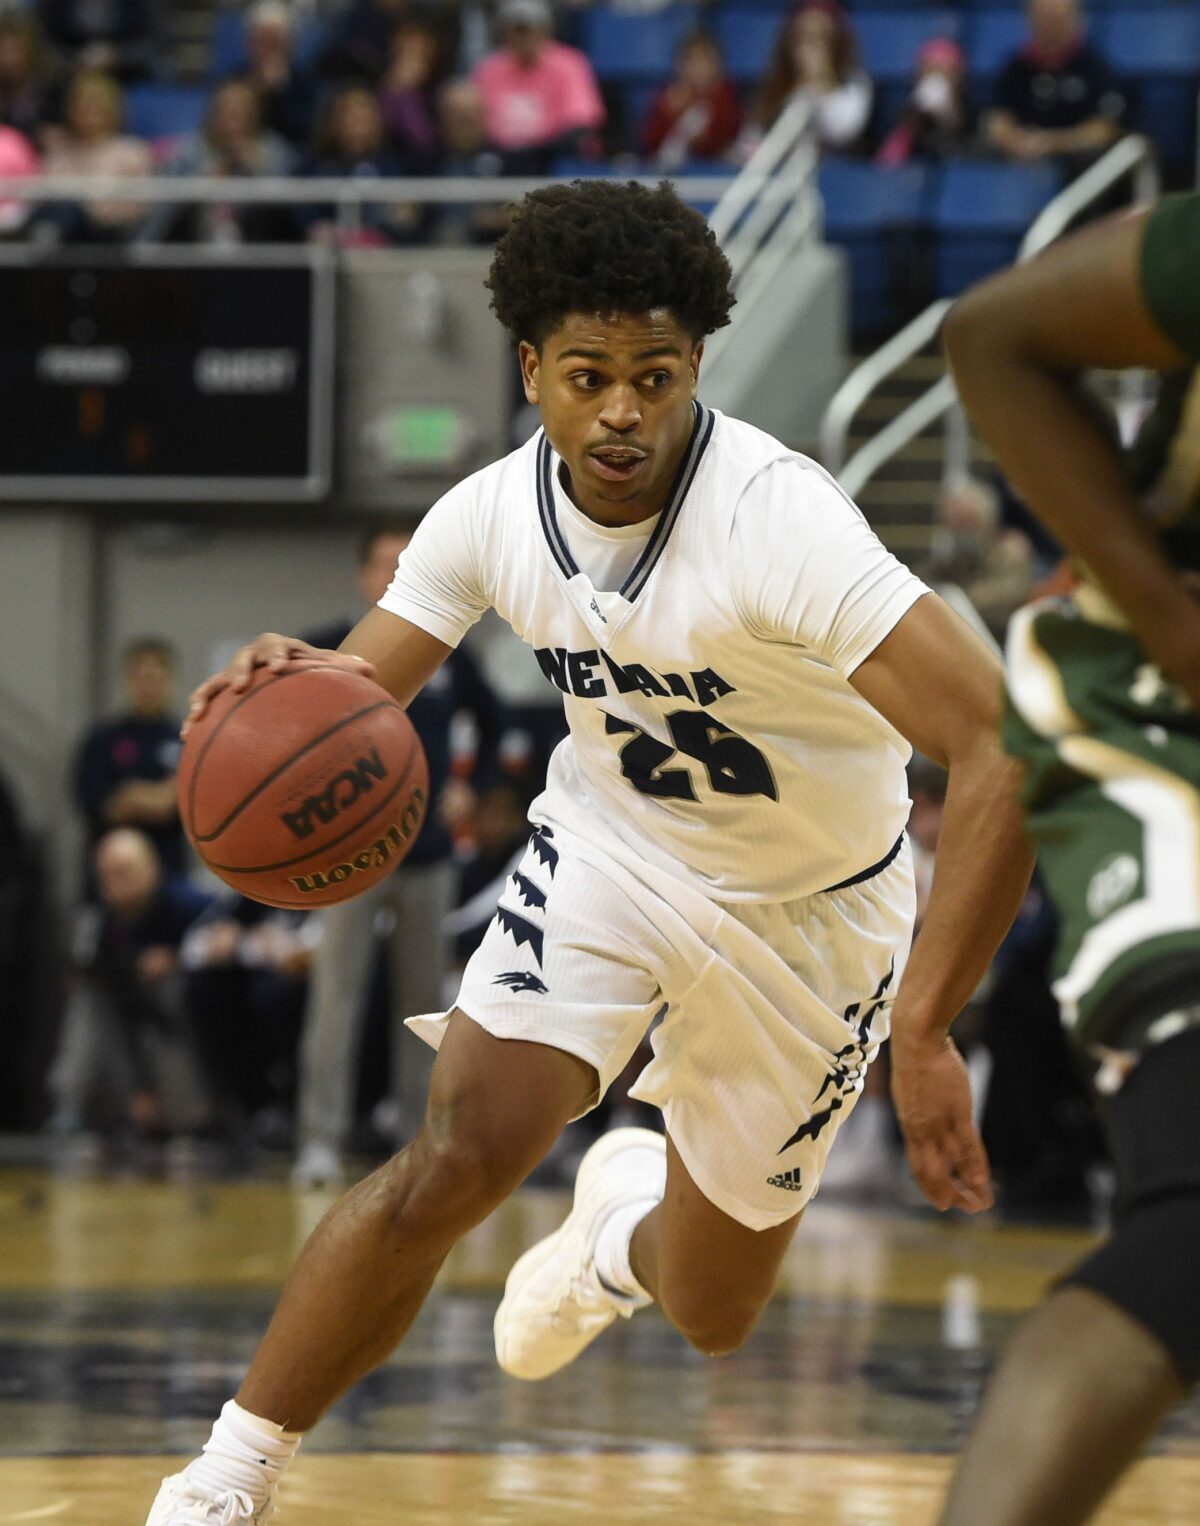 2022 Mountain West Tournament: Nevada Tops New Mexico To Advance To Quarterfinals